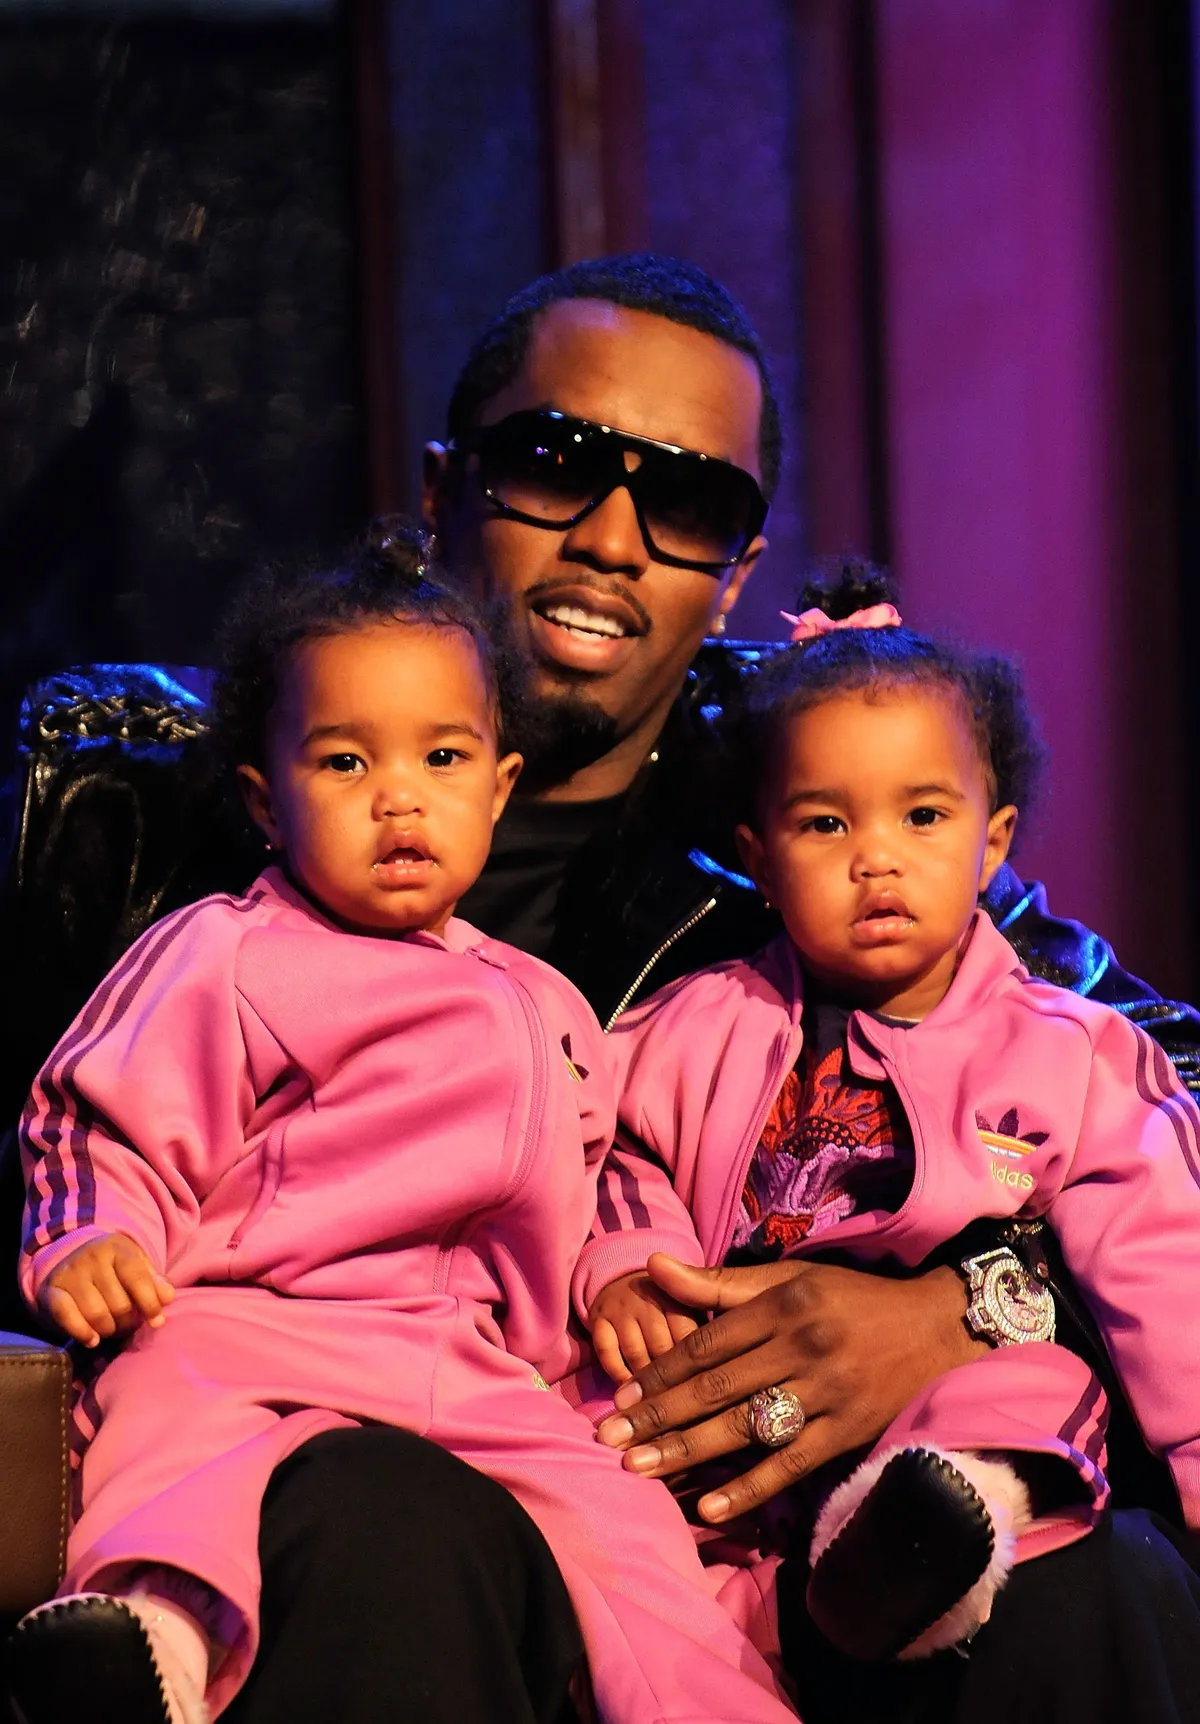 Sean "Diddy" Combs with D'Lila and Jessie Combs at the taping of MTV's "Making The Band 4" season finale at MTV Studios Times Square on March 22, 2008 in New York City. | Photo: Getty Images